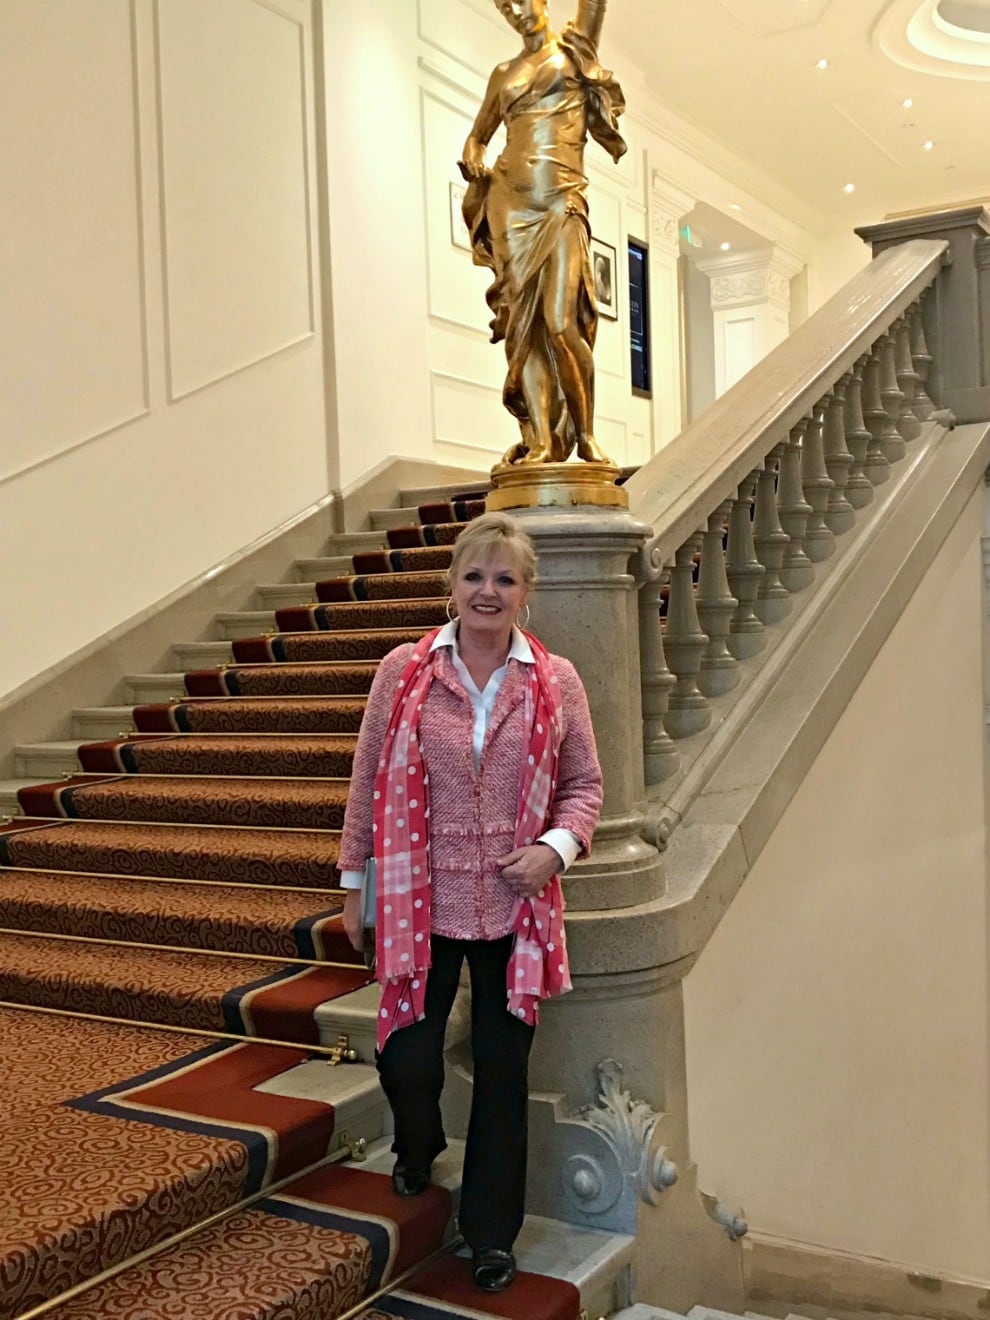 Jennifer Connolly of A Well Styled Life wearing pink tweed jacket from Chico's with Eileen Fisher pants and Talbots no-iron white shirt